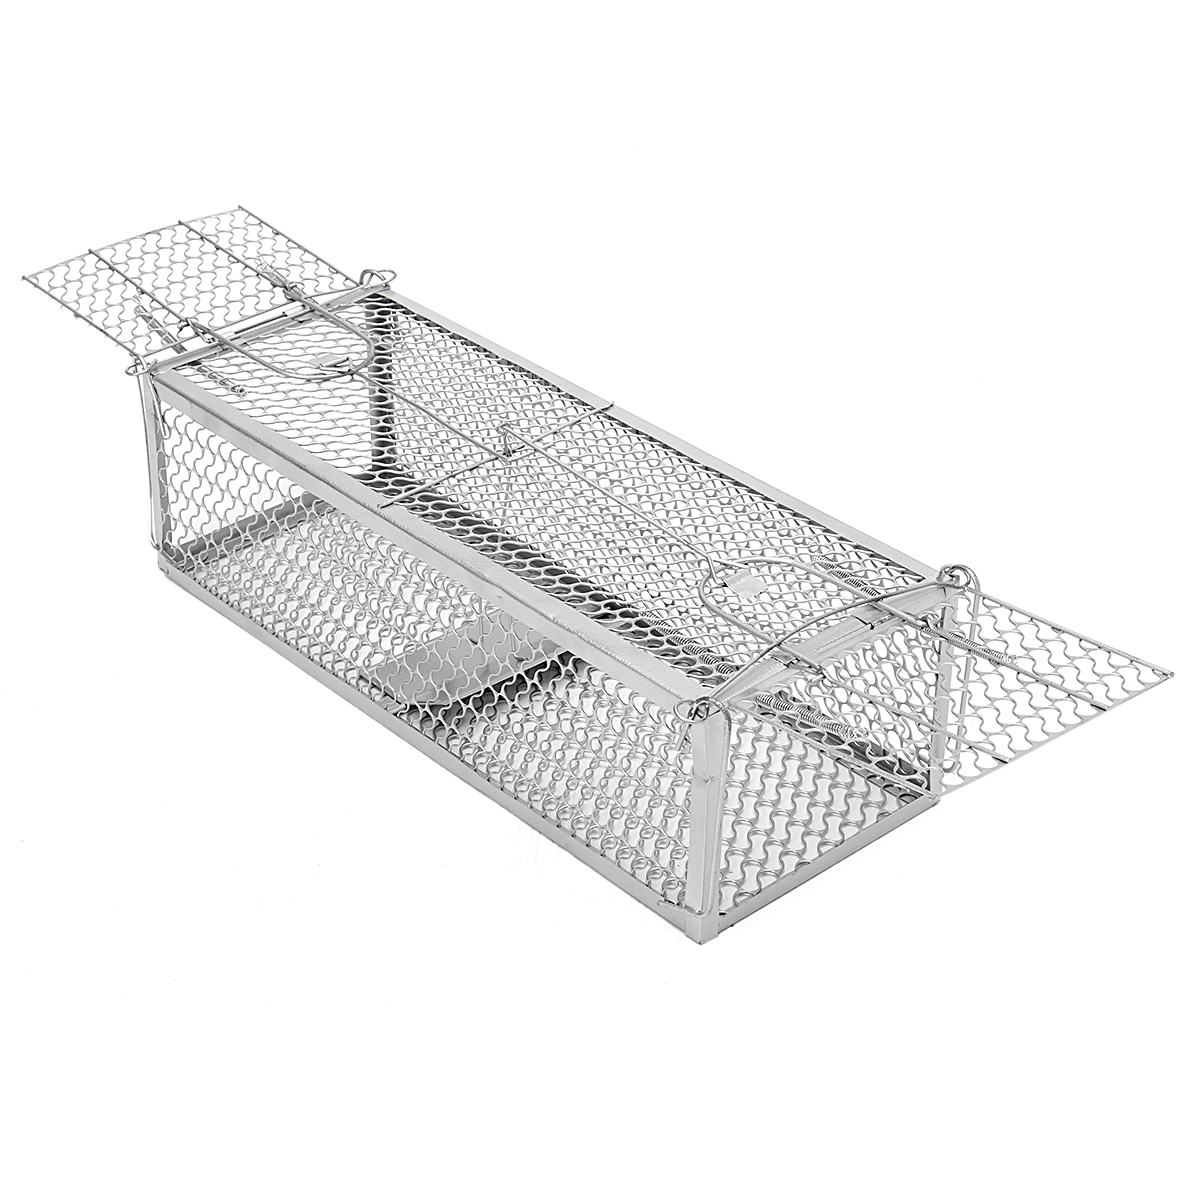 Large-Double-Entry-Mousetrap-Rat-Spring-Cage-Trap-Human-Control-Animal-Rodent-Catcher-No-Poison-1368392